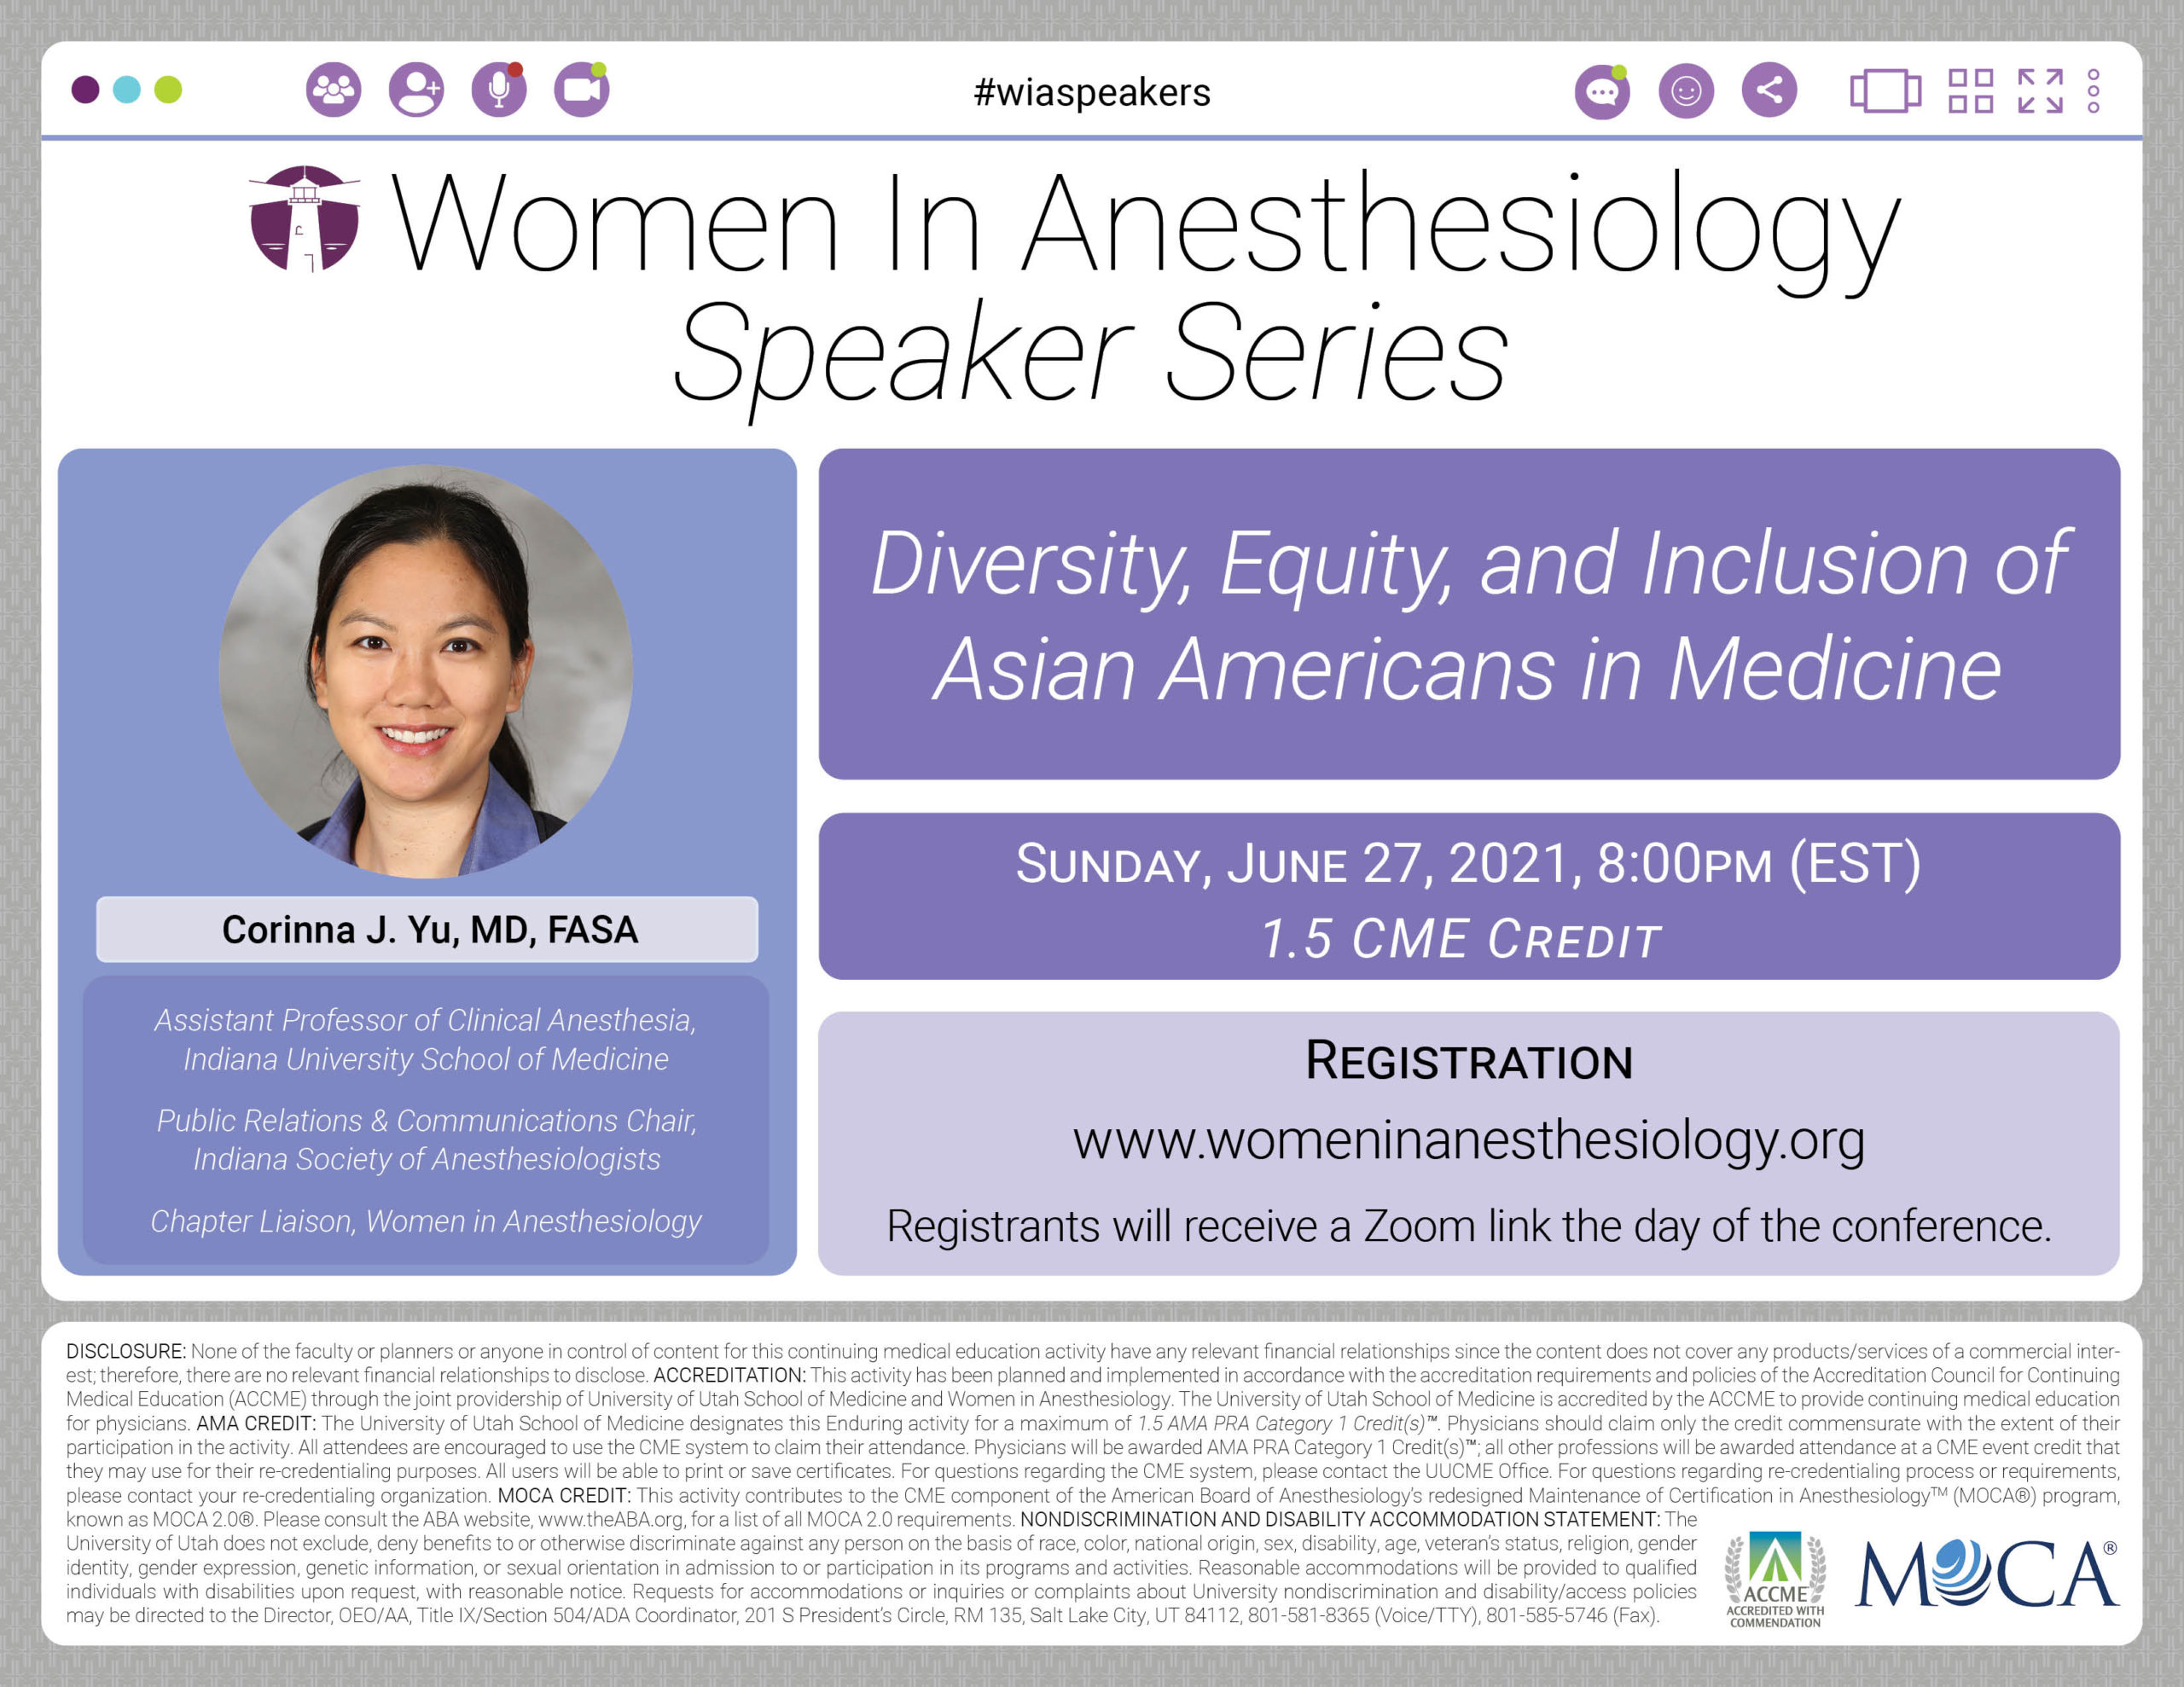 WIA Speaker Series - Corinna J. Yu – Diversity, Equity, and Inclusion of Asian Americans in Medicine